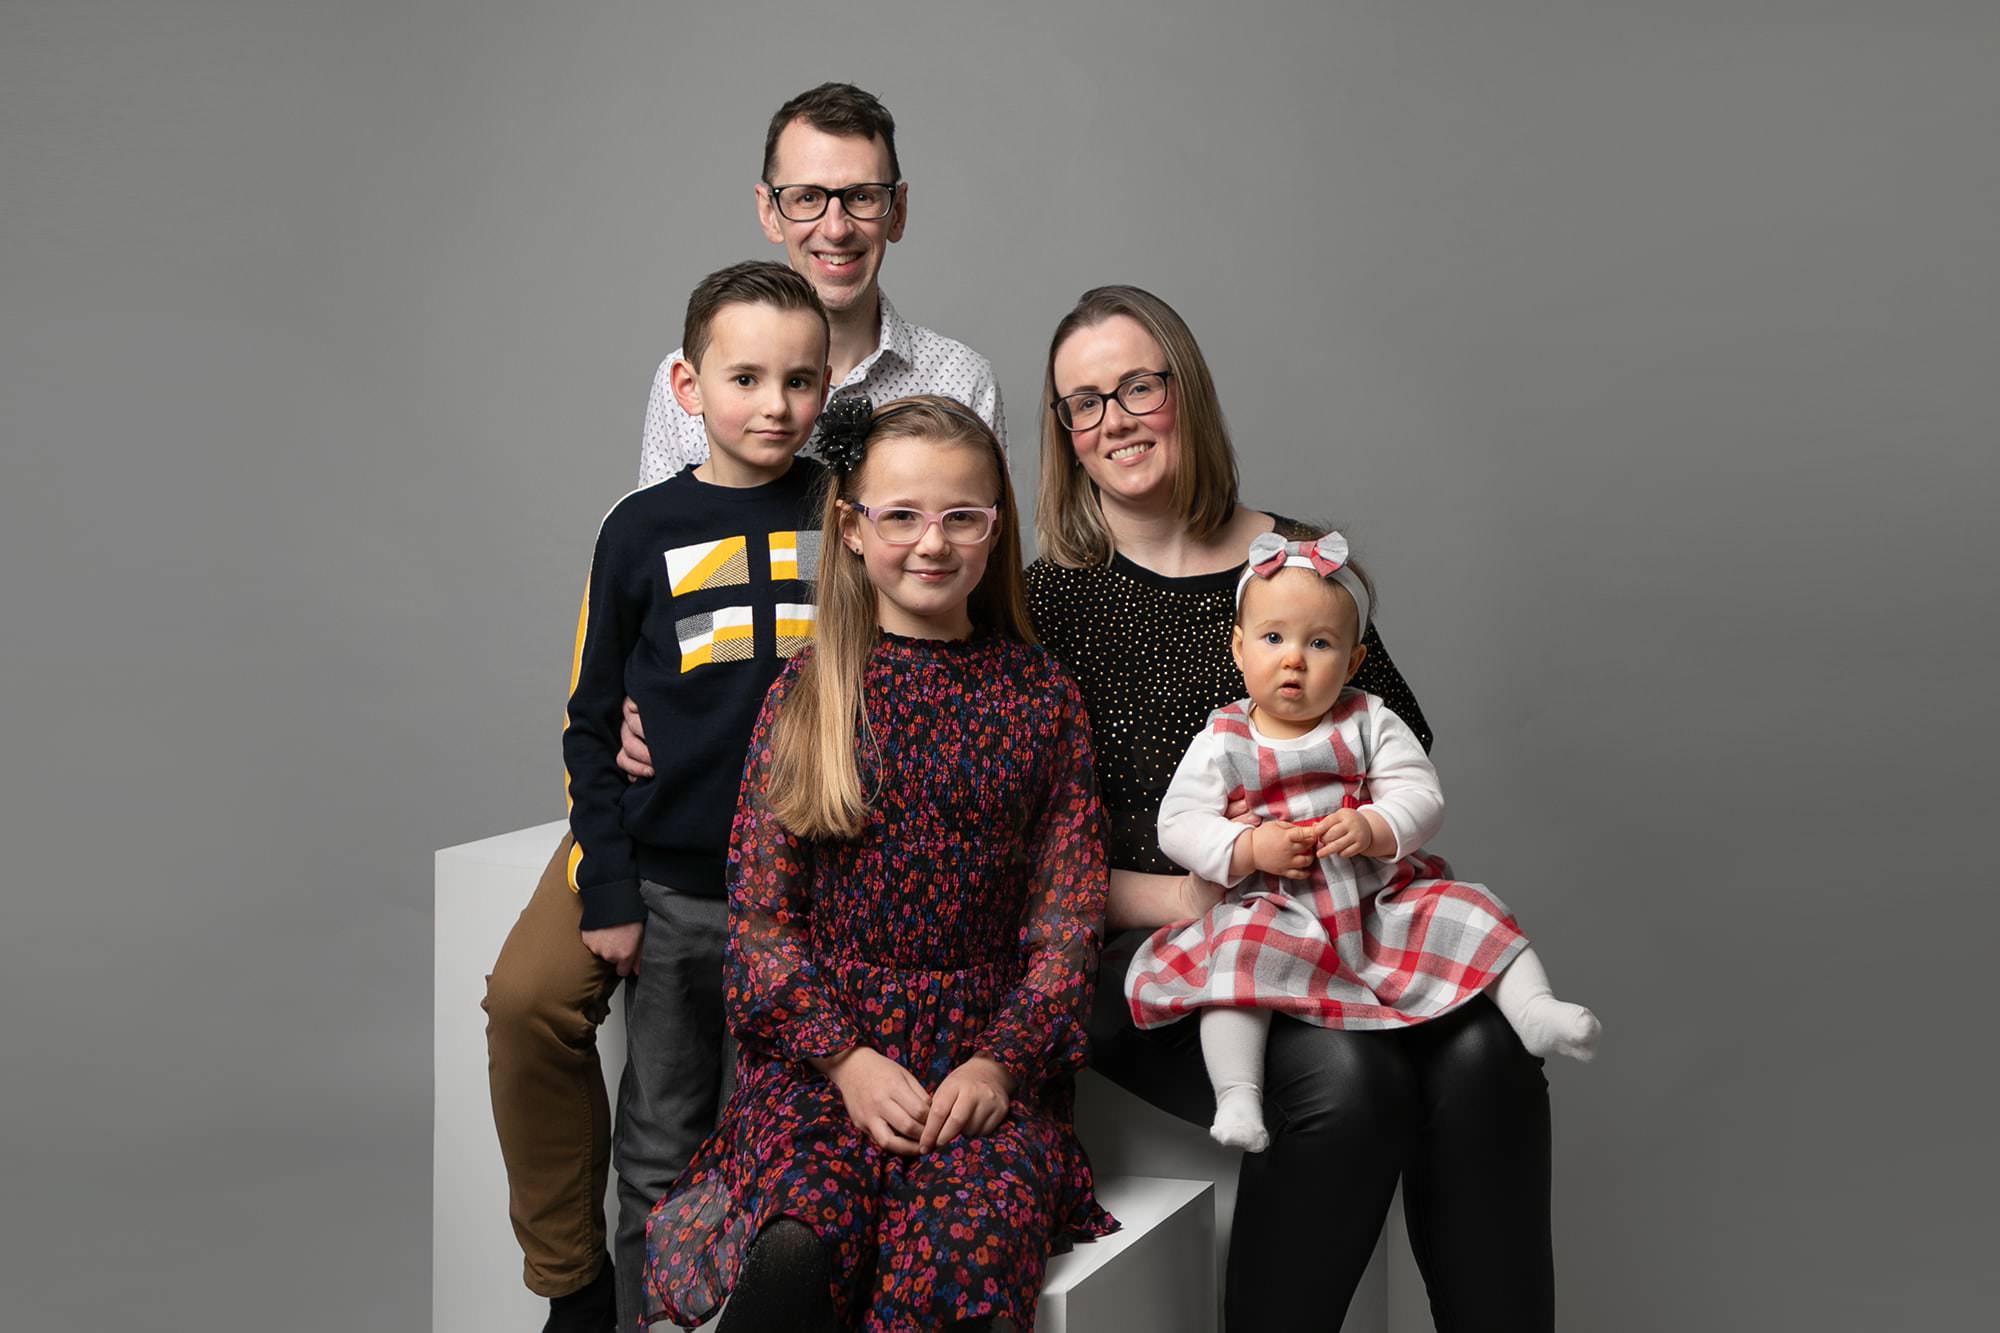 Family of 5 during photoshoot in Glasgow. Image taken on grey backdrop. Girl age 8 wears black dress with floral print. sibling baby sits on Mum's lap wearing red grey & white check dress. Boy sits on Dad's lap wearing black T with yellow pattern. Image by Baby Photographer in Newton Mearns